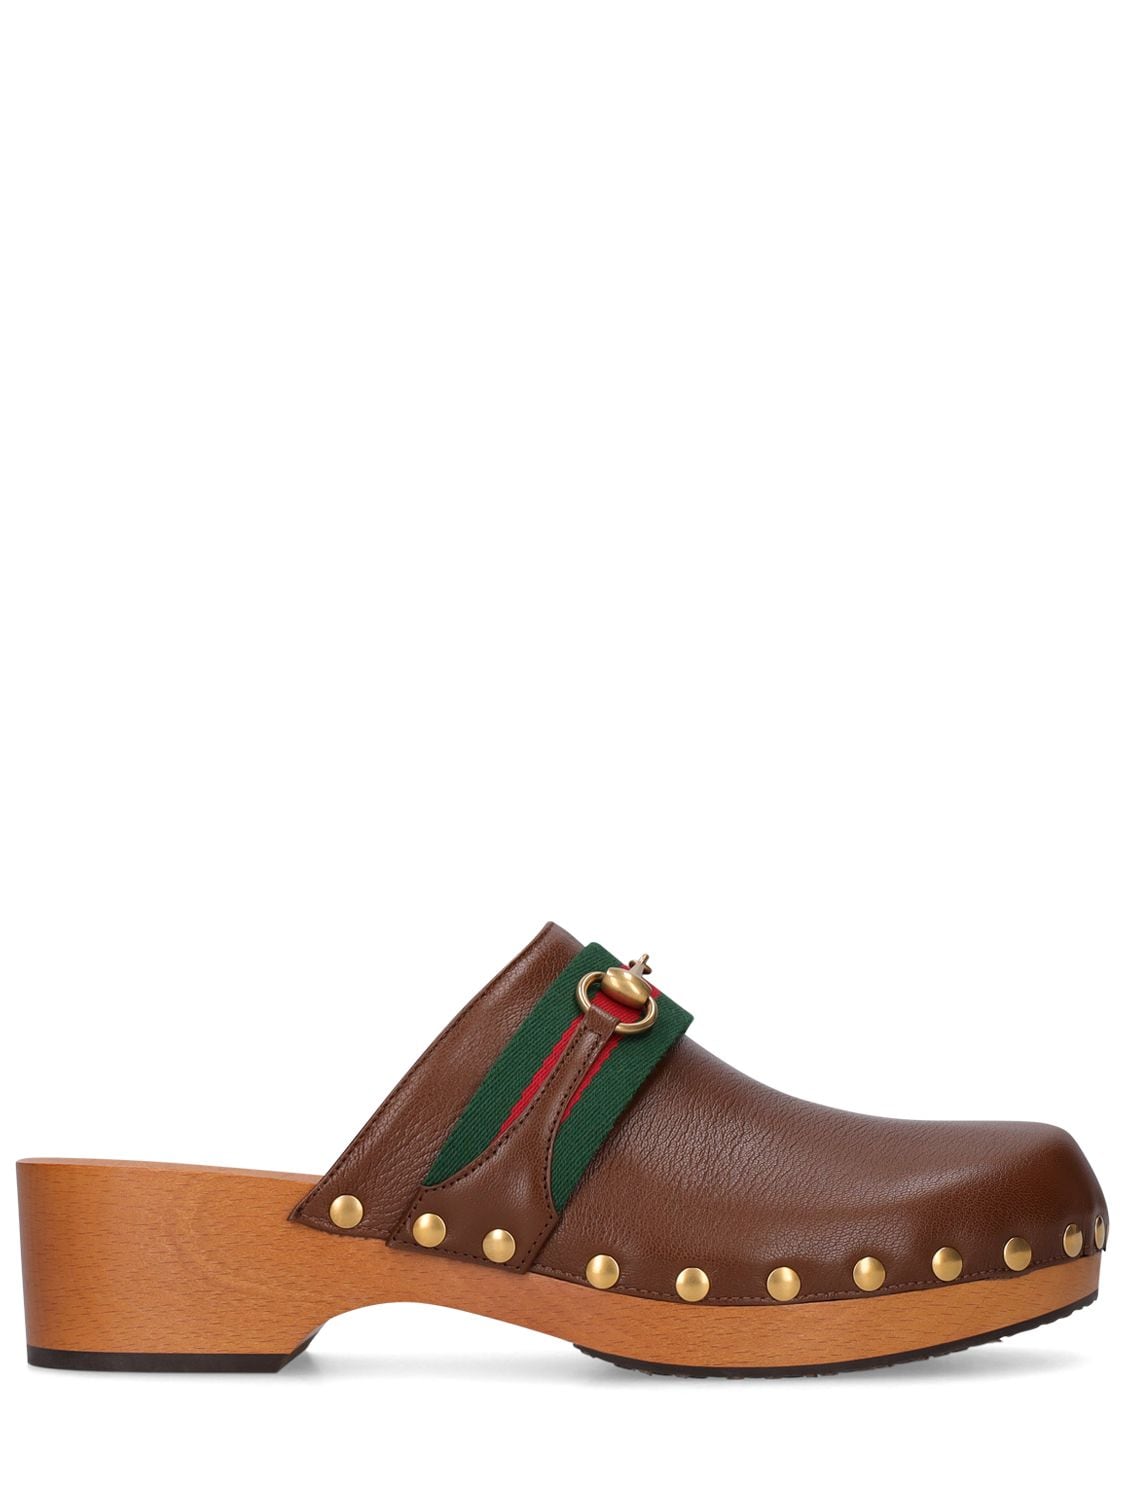 Gucci Leather Slide Sandals In Brown Sugar